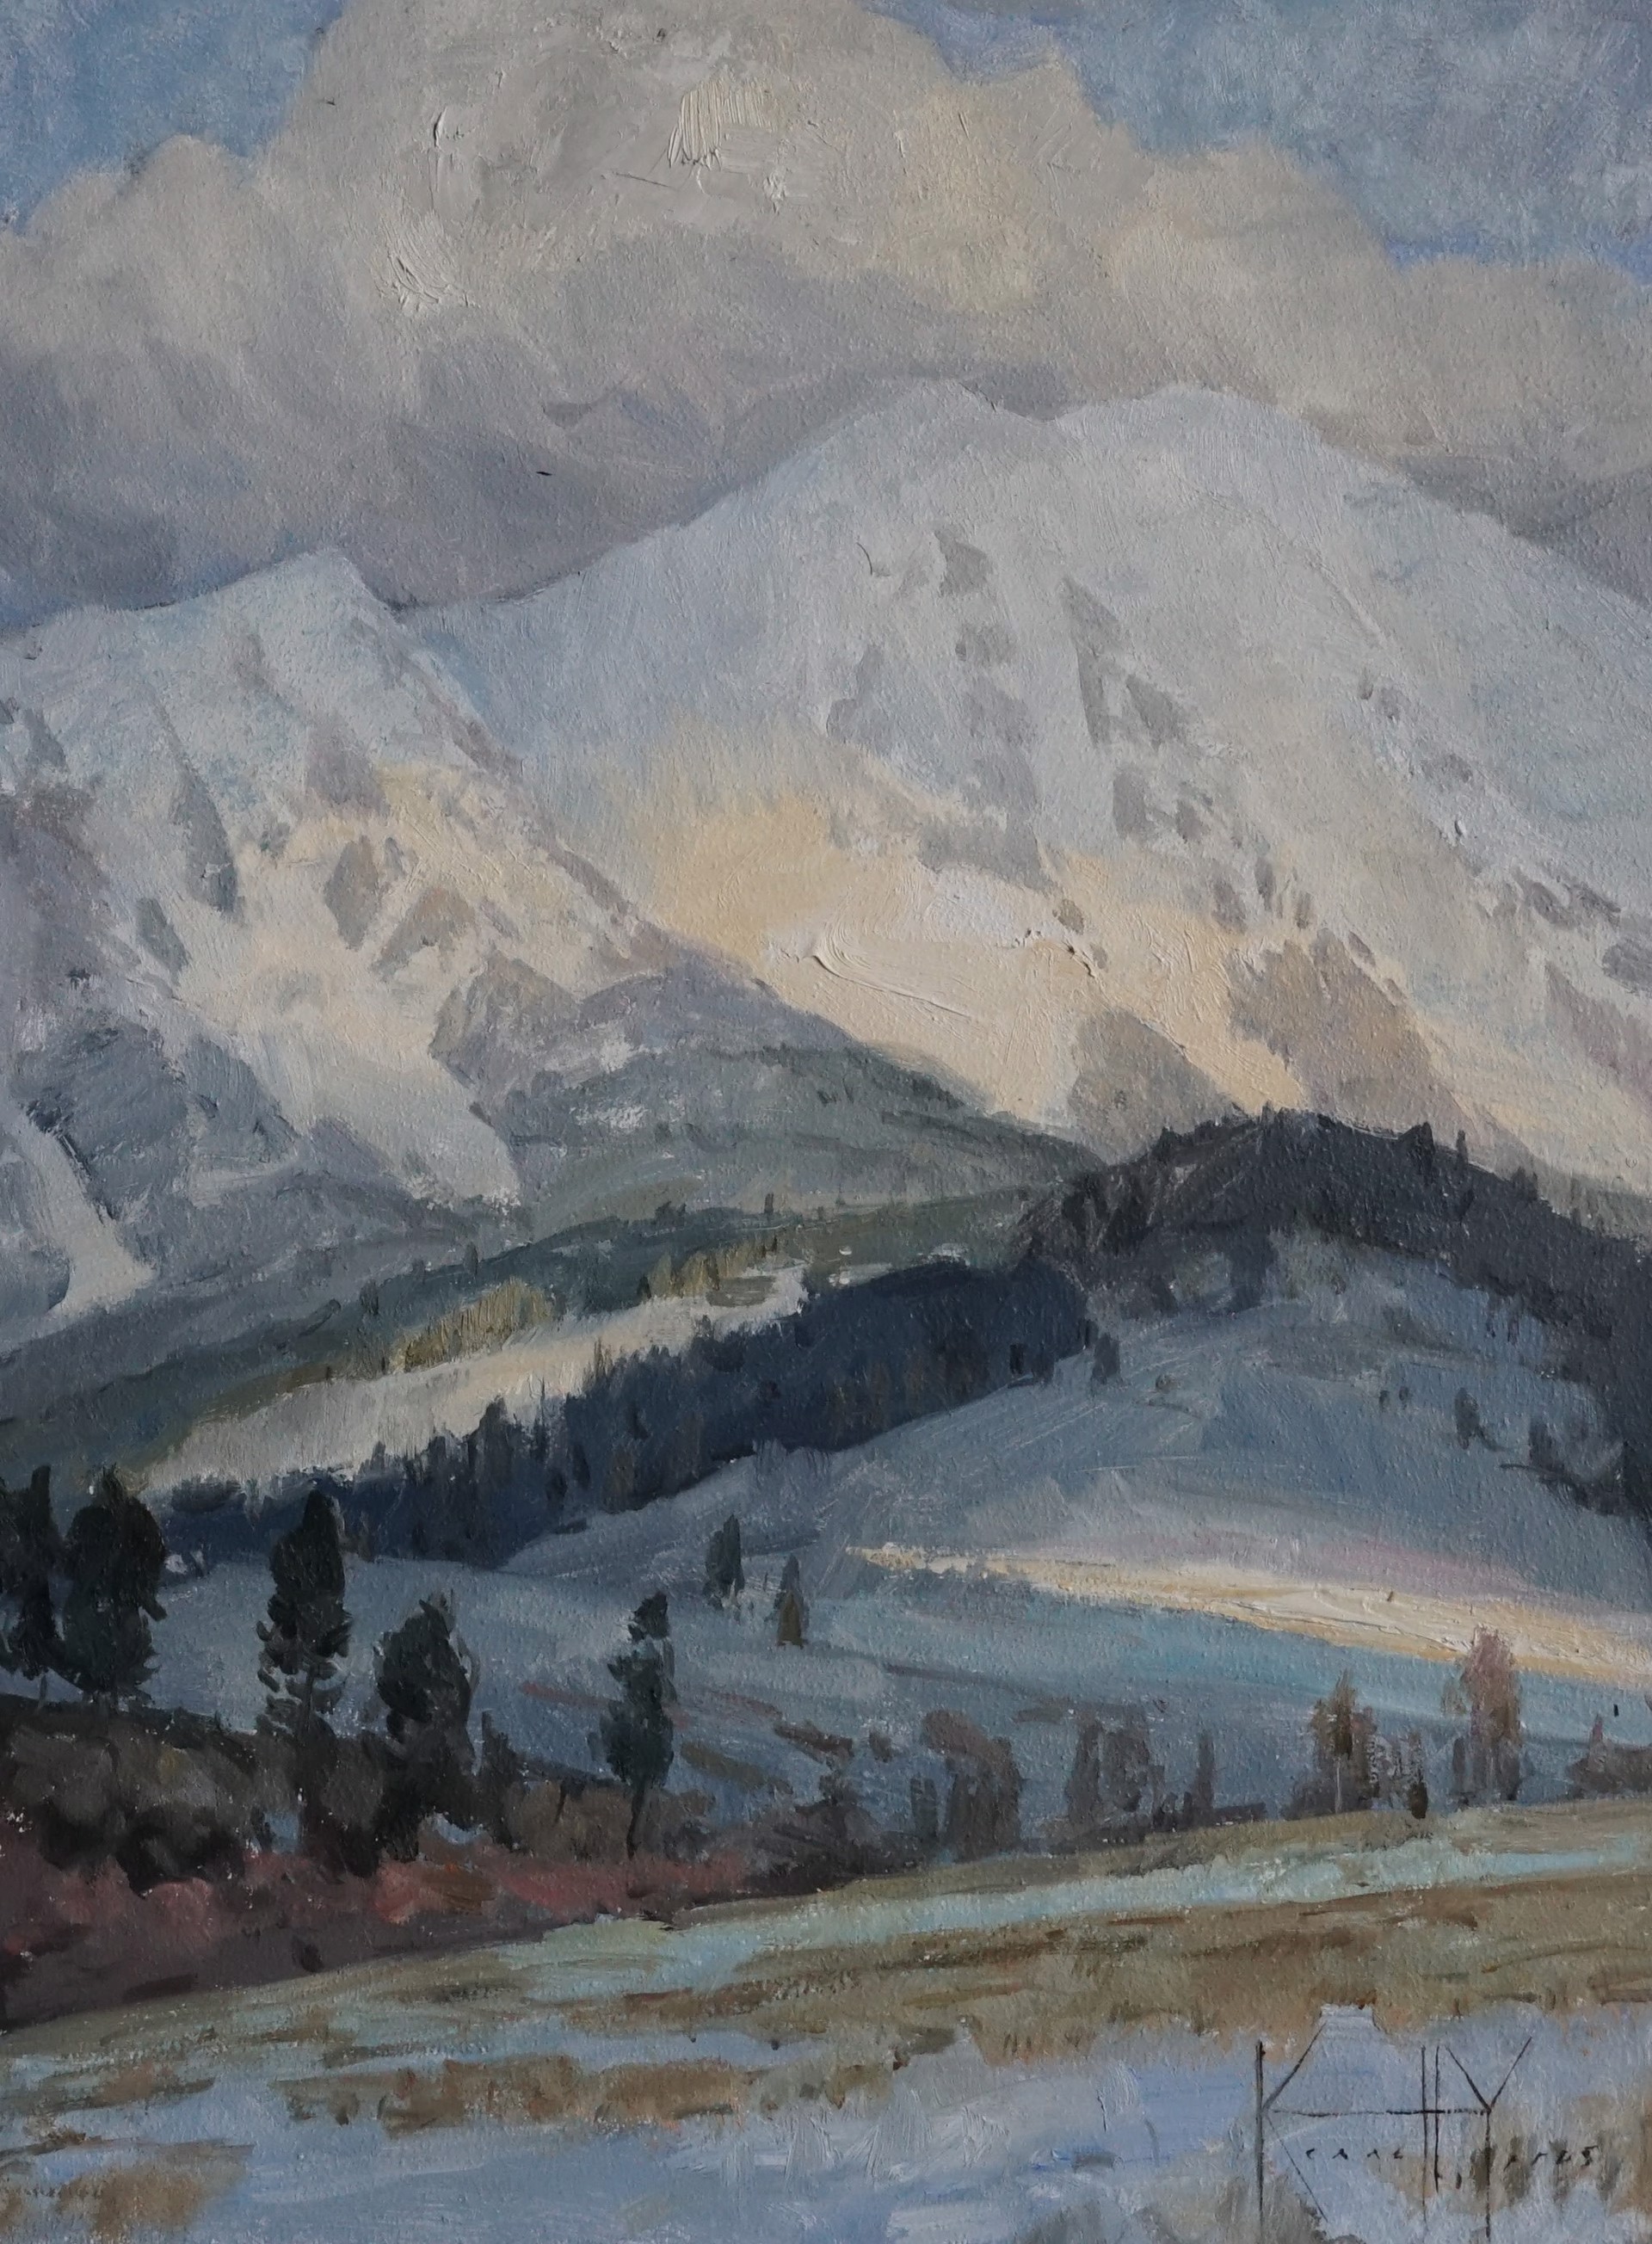 PASSING LIGHT ON BRIDGER MOUNTAINS by Kenneth Yarus